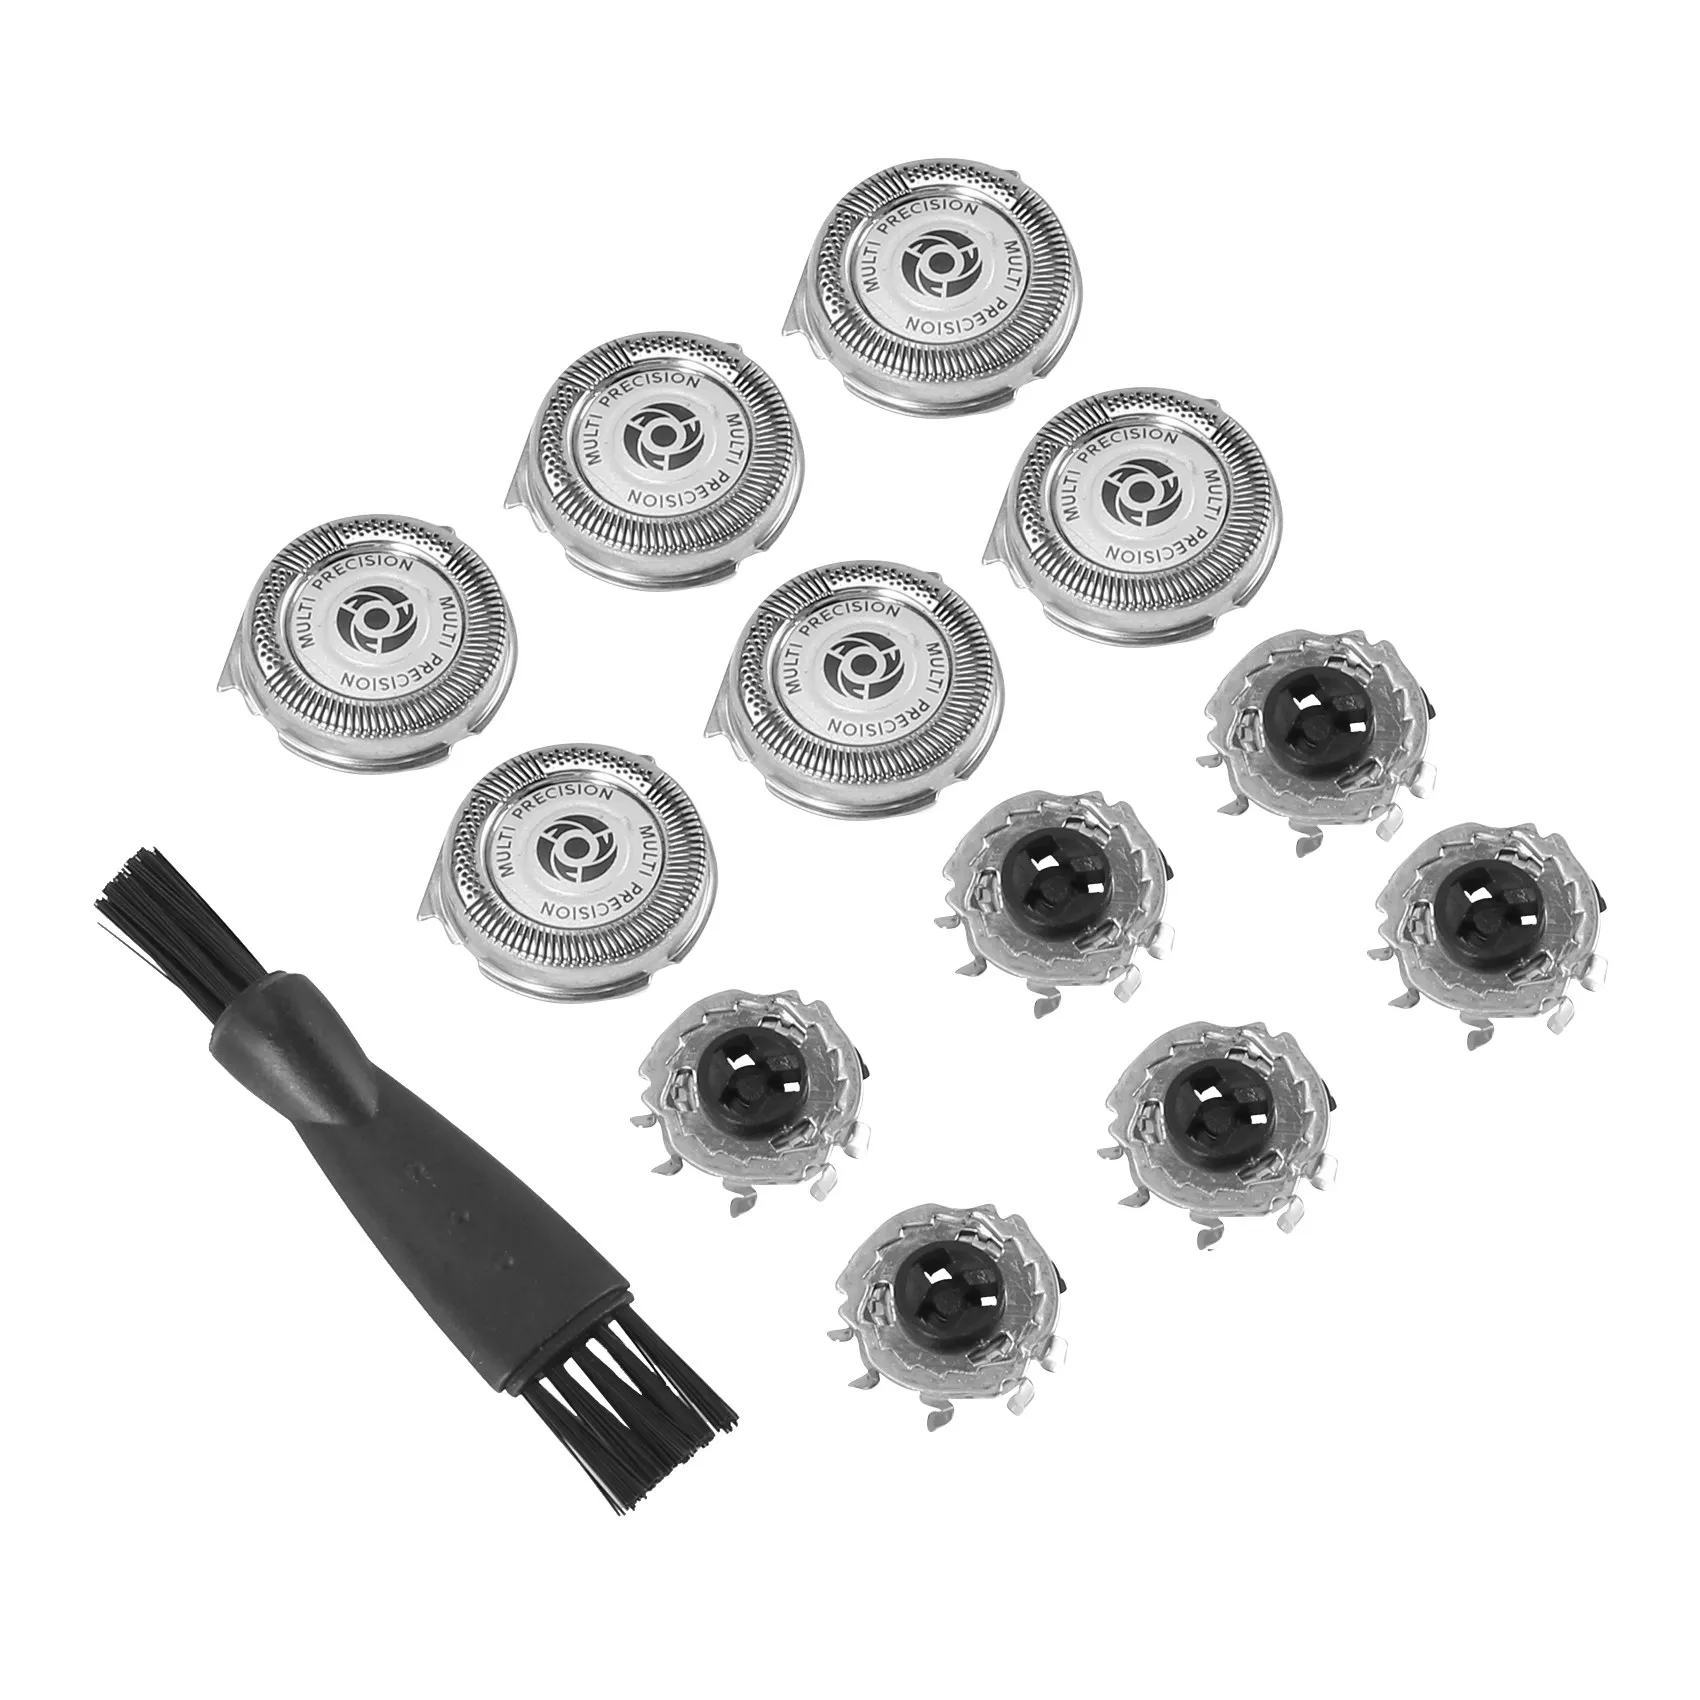 

7Pcs Replacement Electric Shaver Heads for Philips SH50 Series 5000 S5085 S5050 S5000 S5010 S5380 Razor Cutter Blade